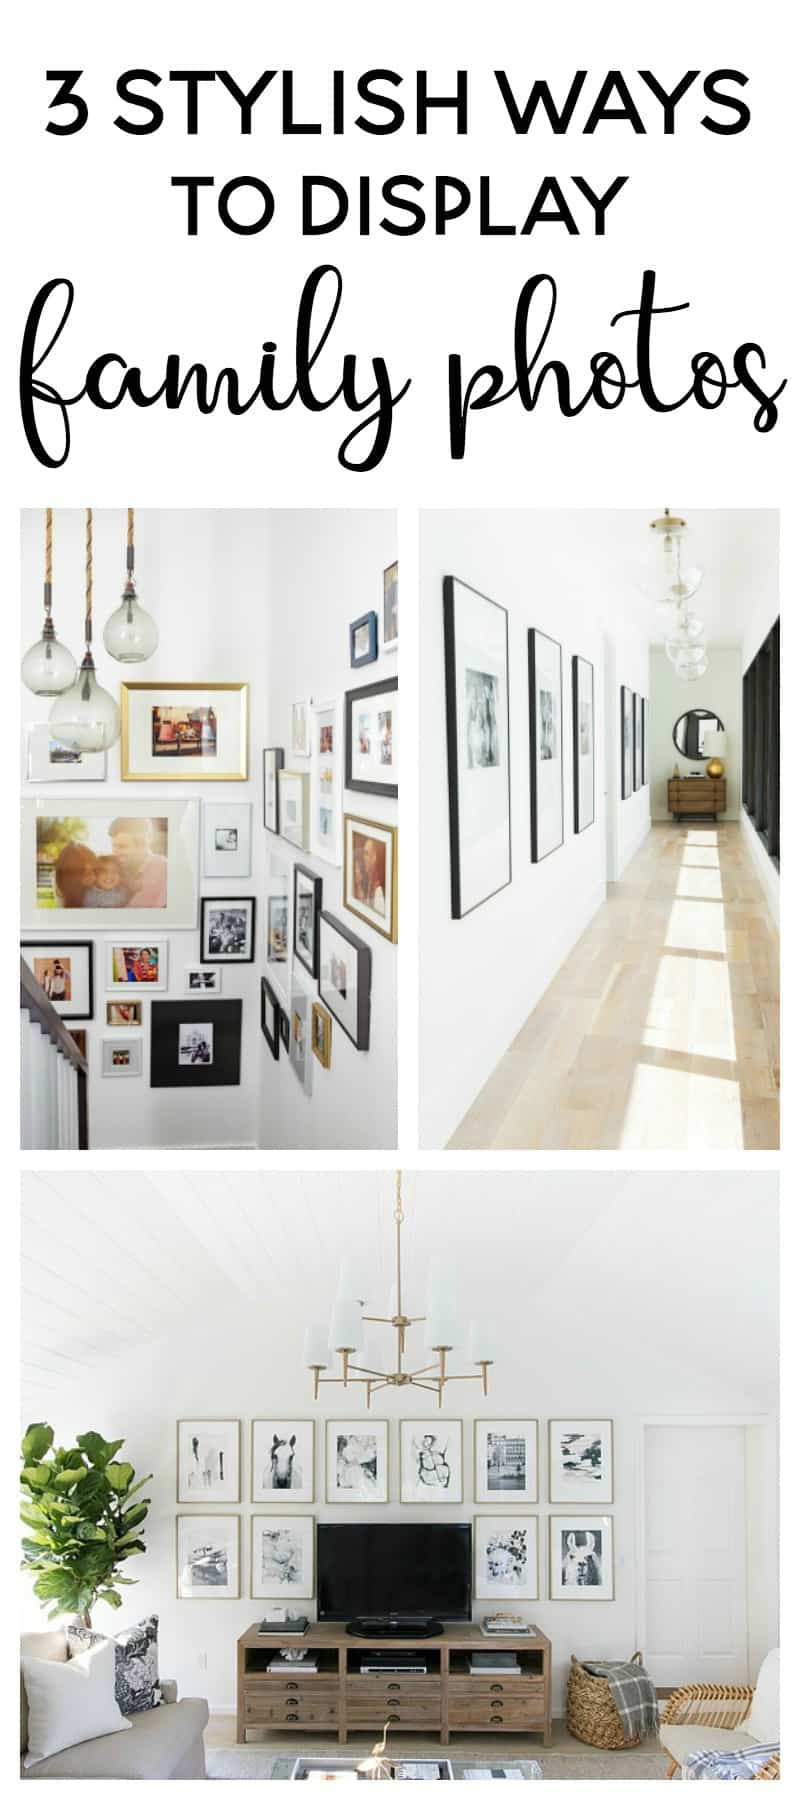 Stairwell displaying family photos in a tasteful way. Hallway with black and white photos displayed. Living room family photo display. 